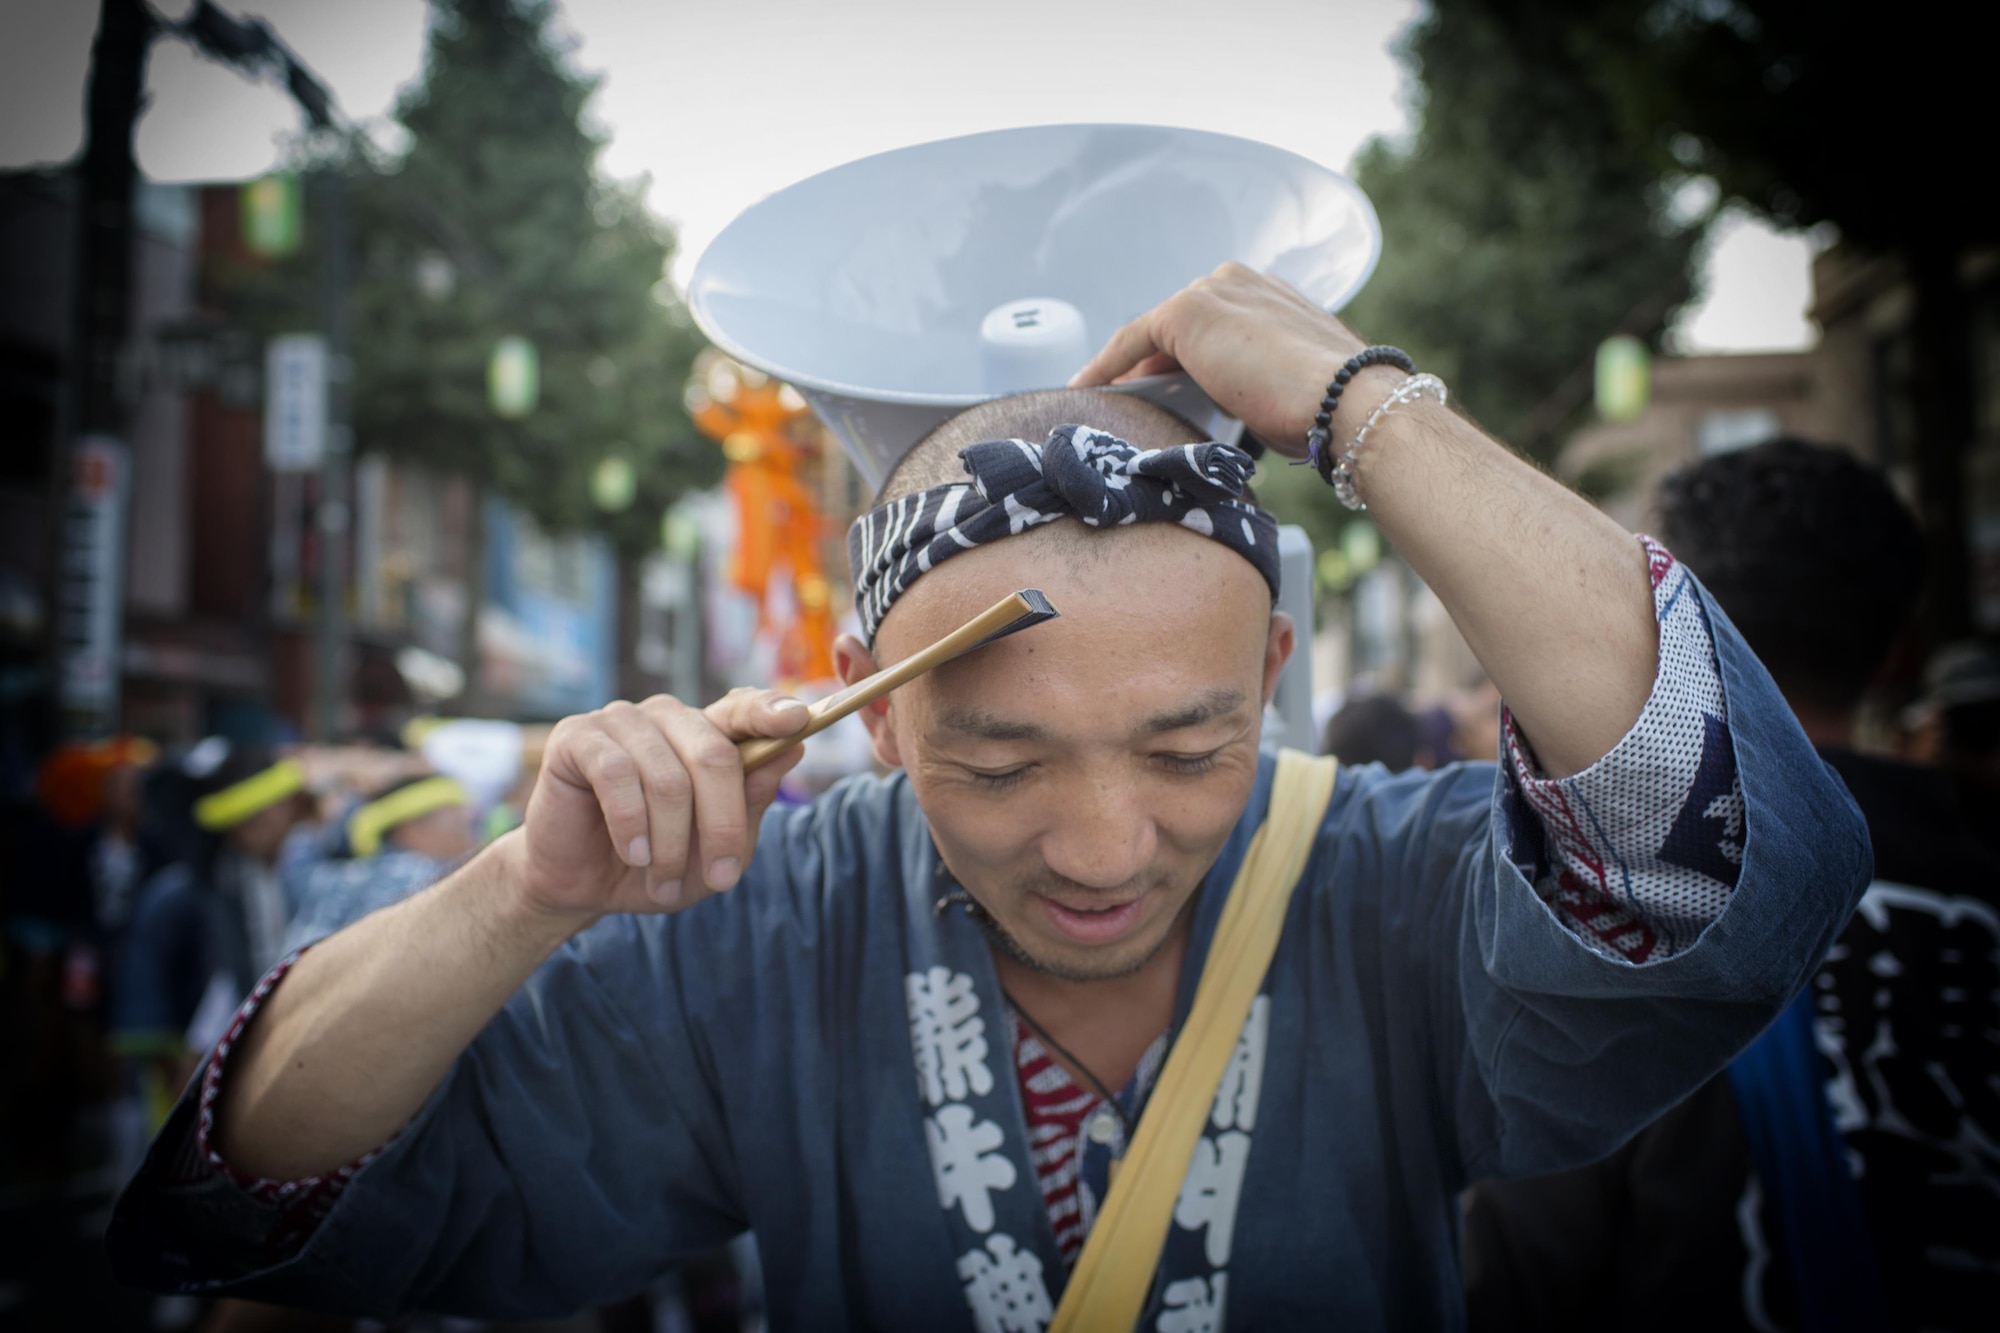 A festival attendee poses for a photo during the 66th annual Fussa Tanabata Festival in Fussa City, Japan, Aug. 5, 2016. The festival included several parades and street vendors selling a variety of traditional Japanese street foods. (U.S. Air Force photo by Yasuo Osakabe/Released)  